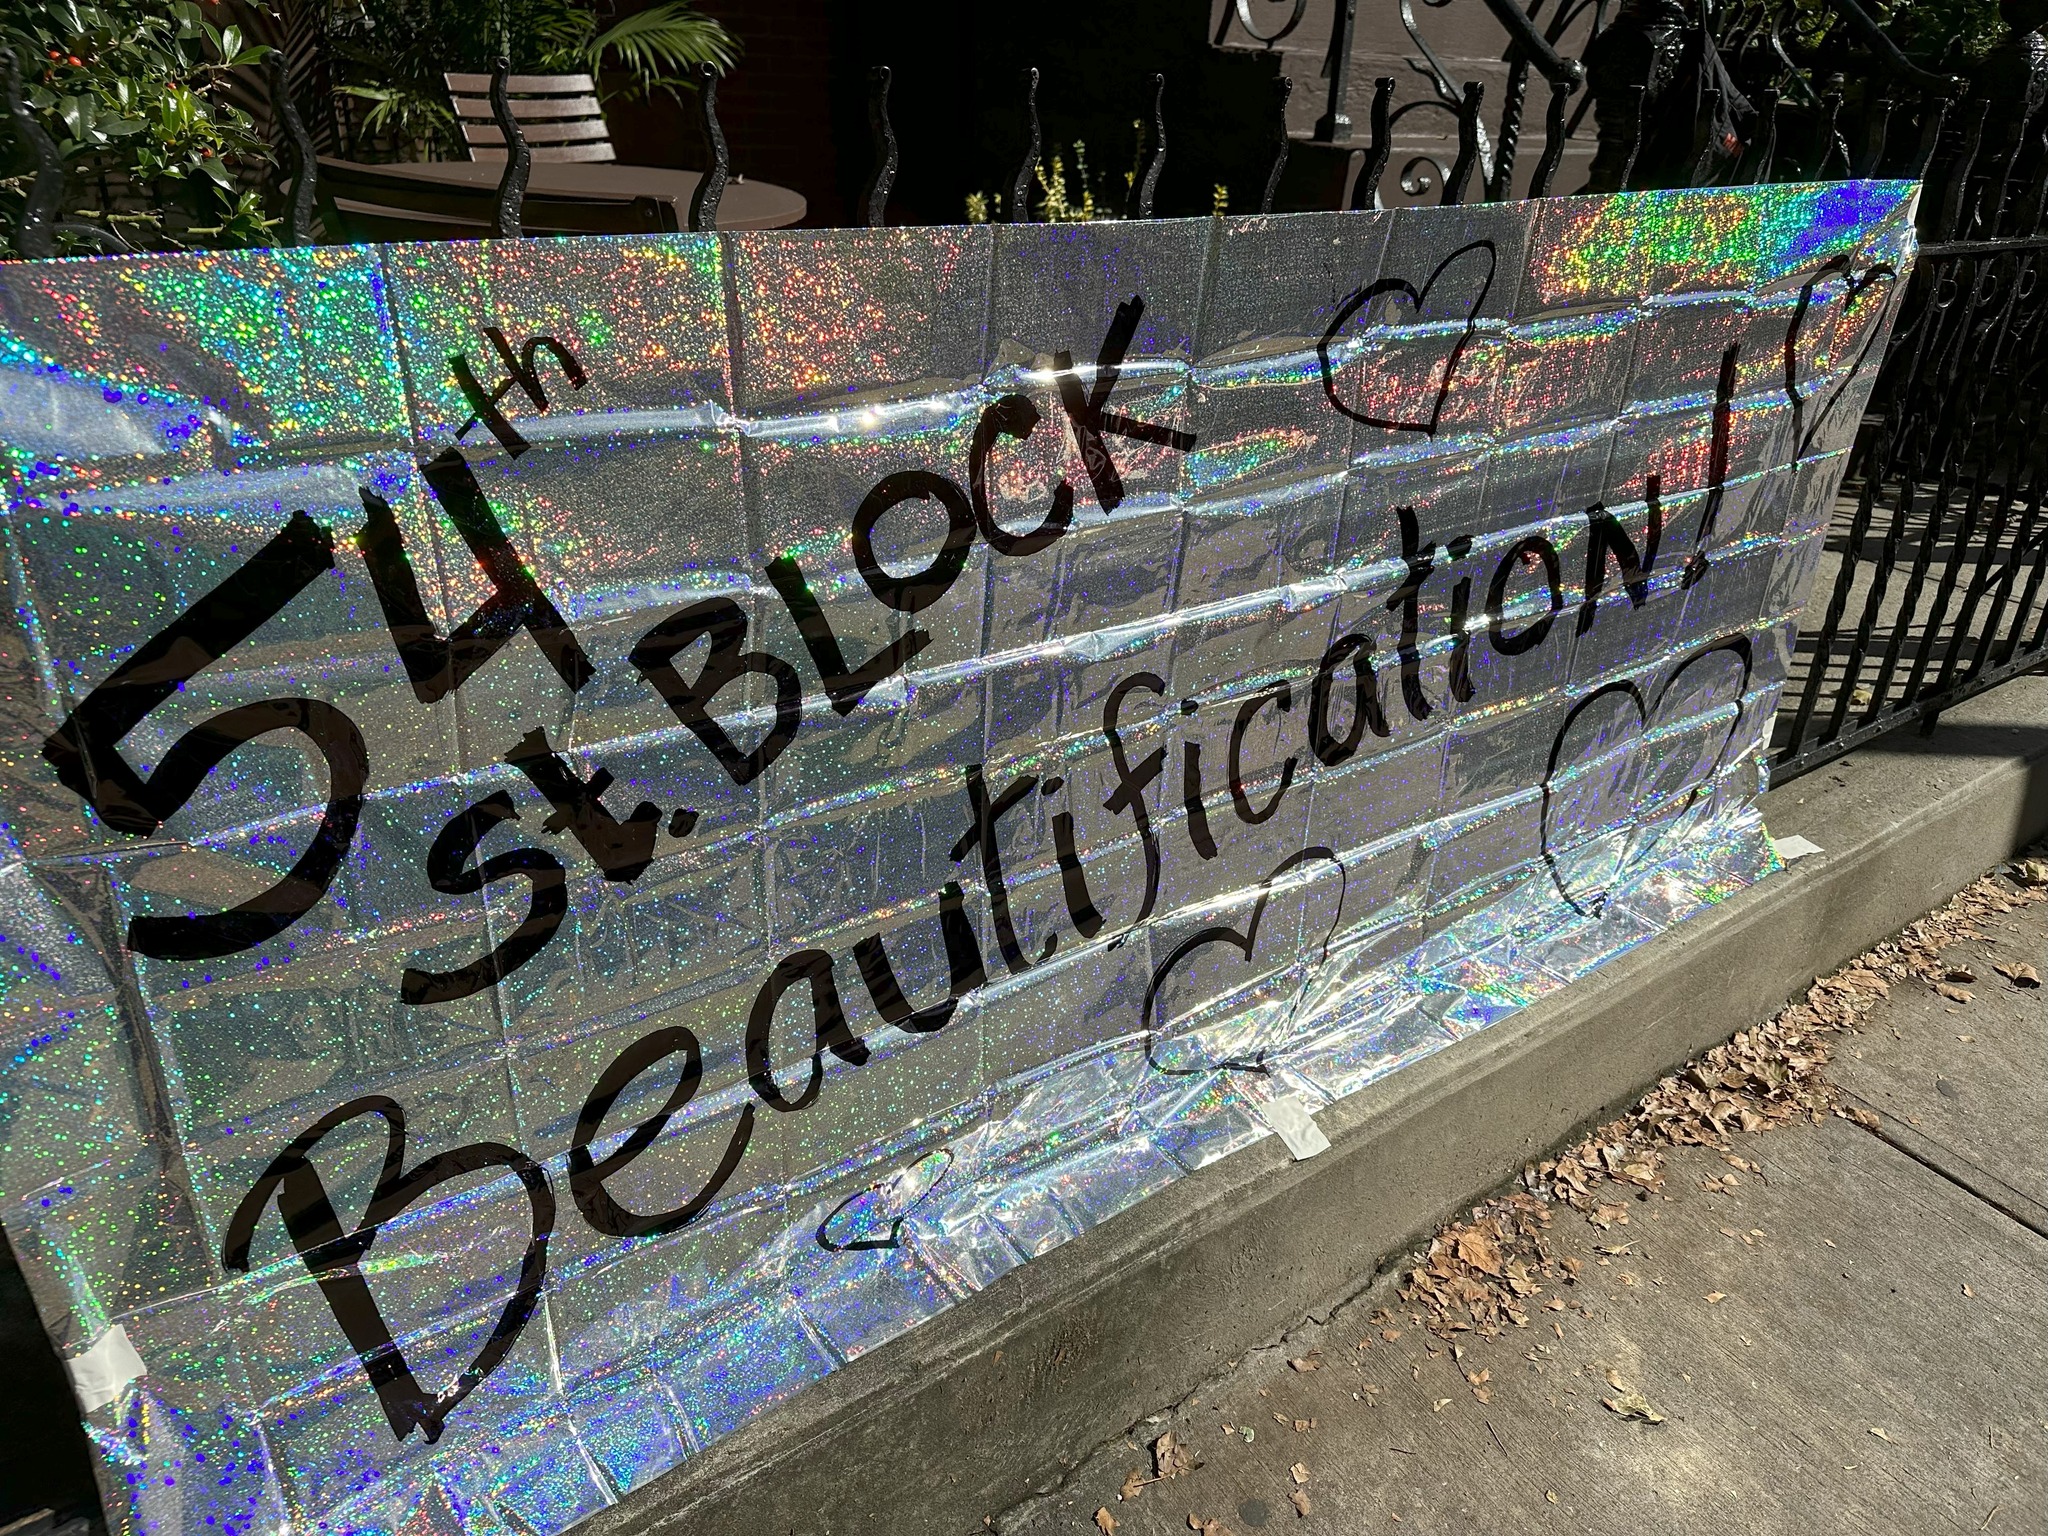 A glittering sign reads "54th st. block beautification" in bold, black letters, displayed in front of a fence on a sunny day.